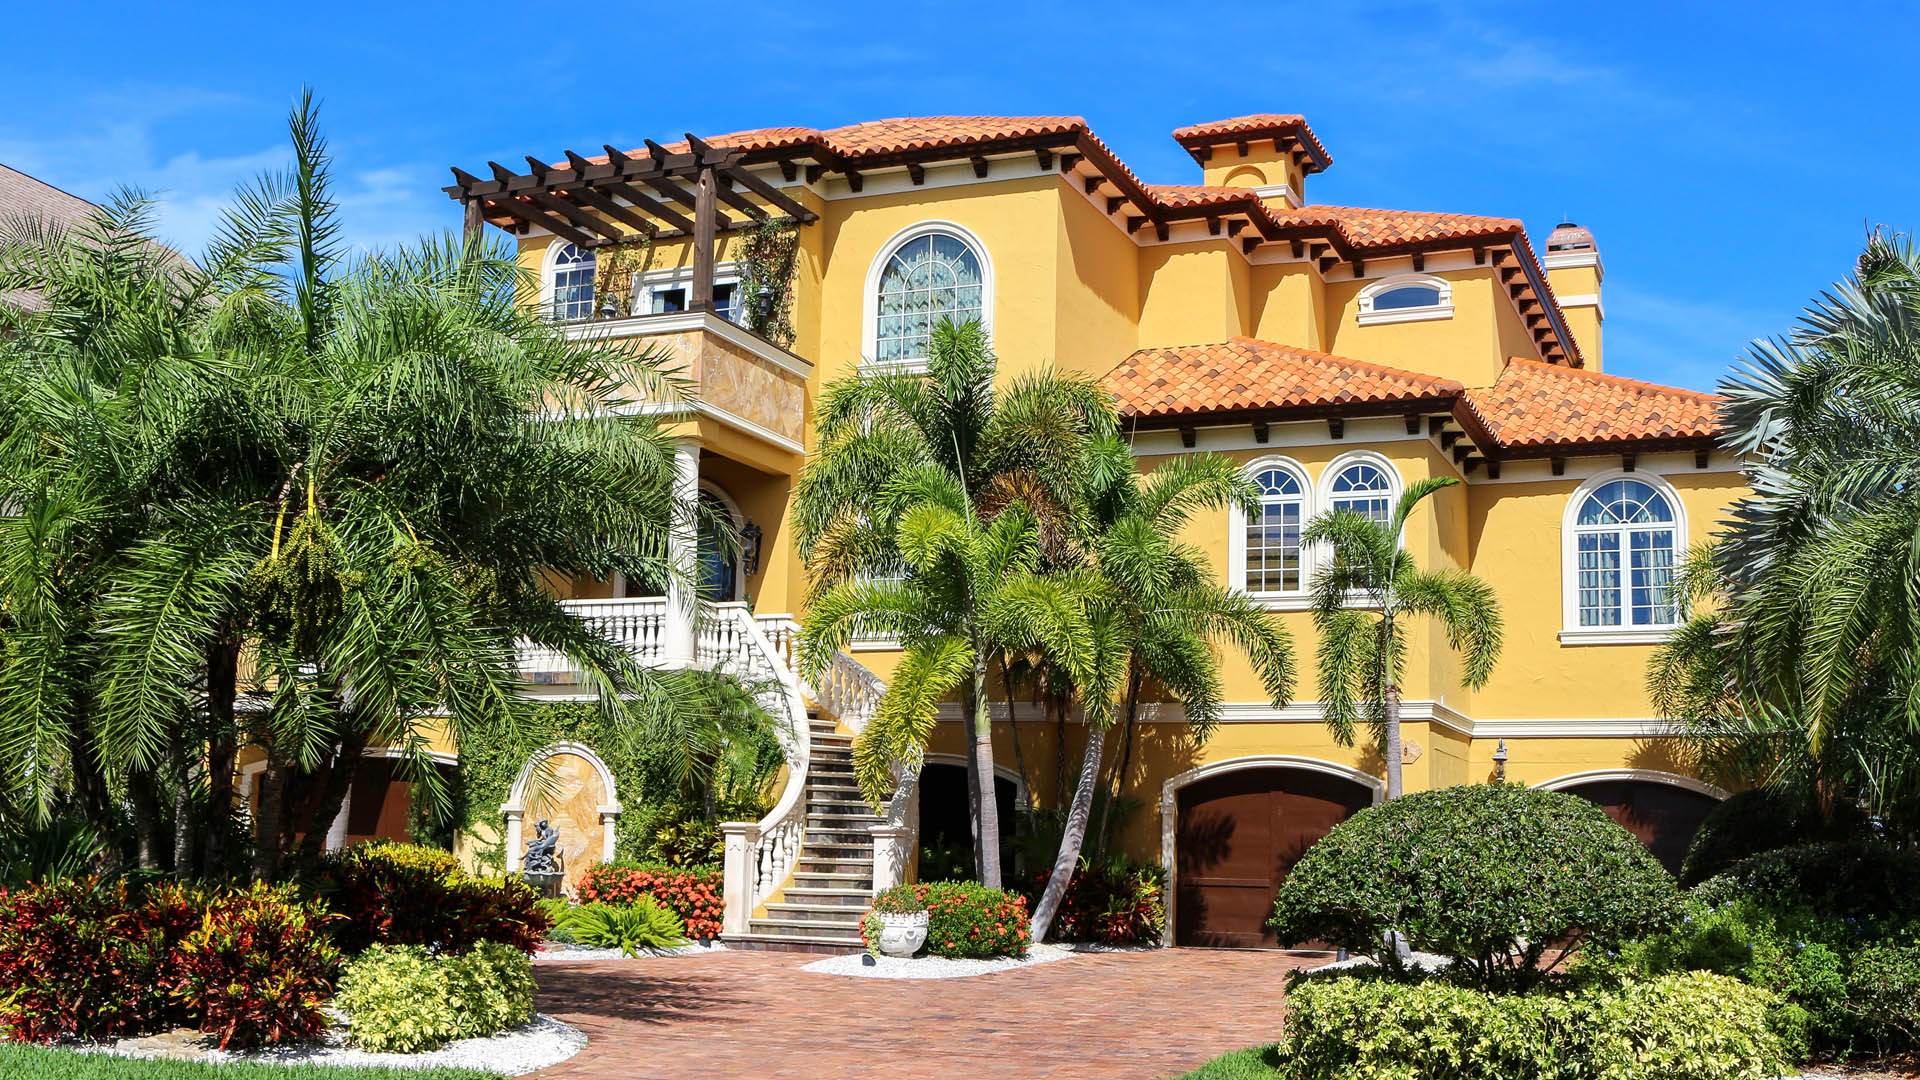 Why do you need a Real Estate Attorney in Florida?